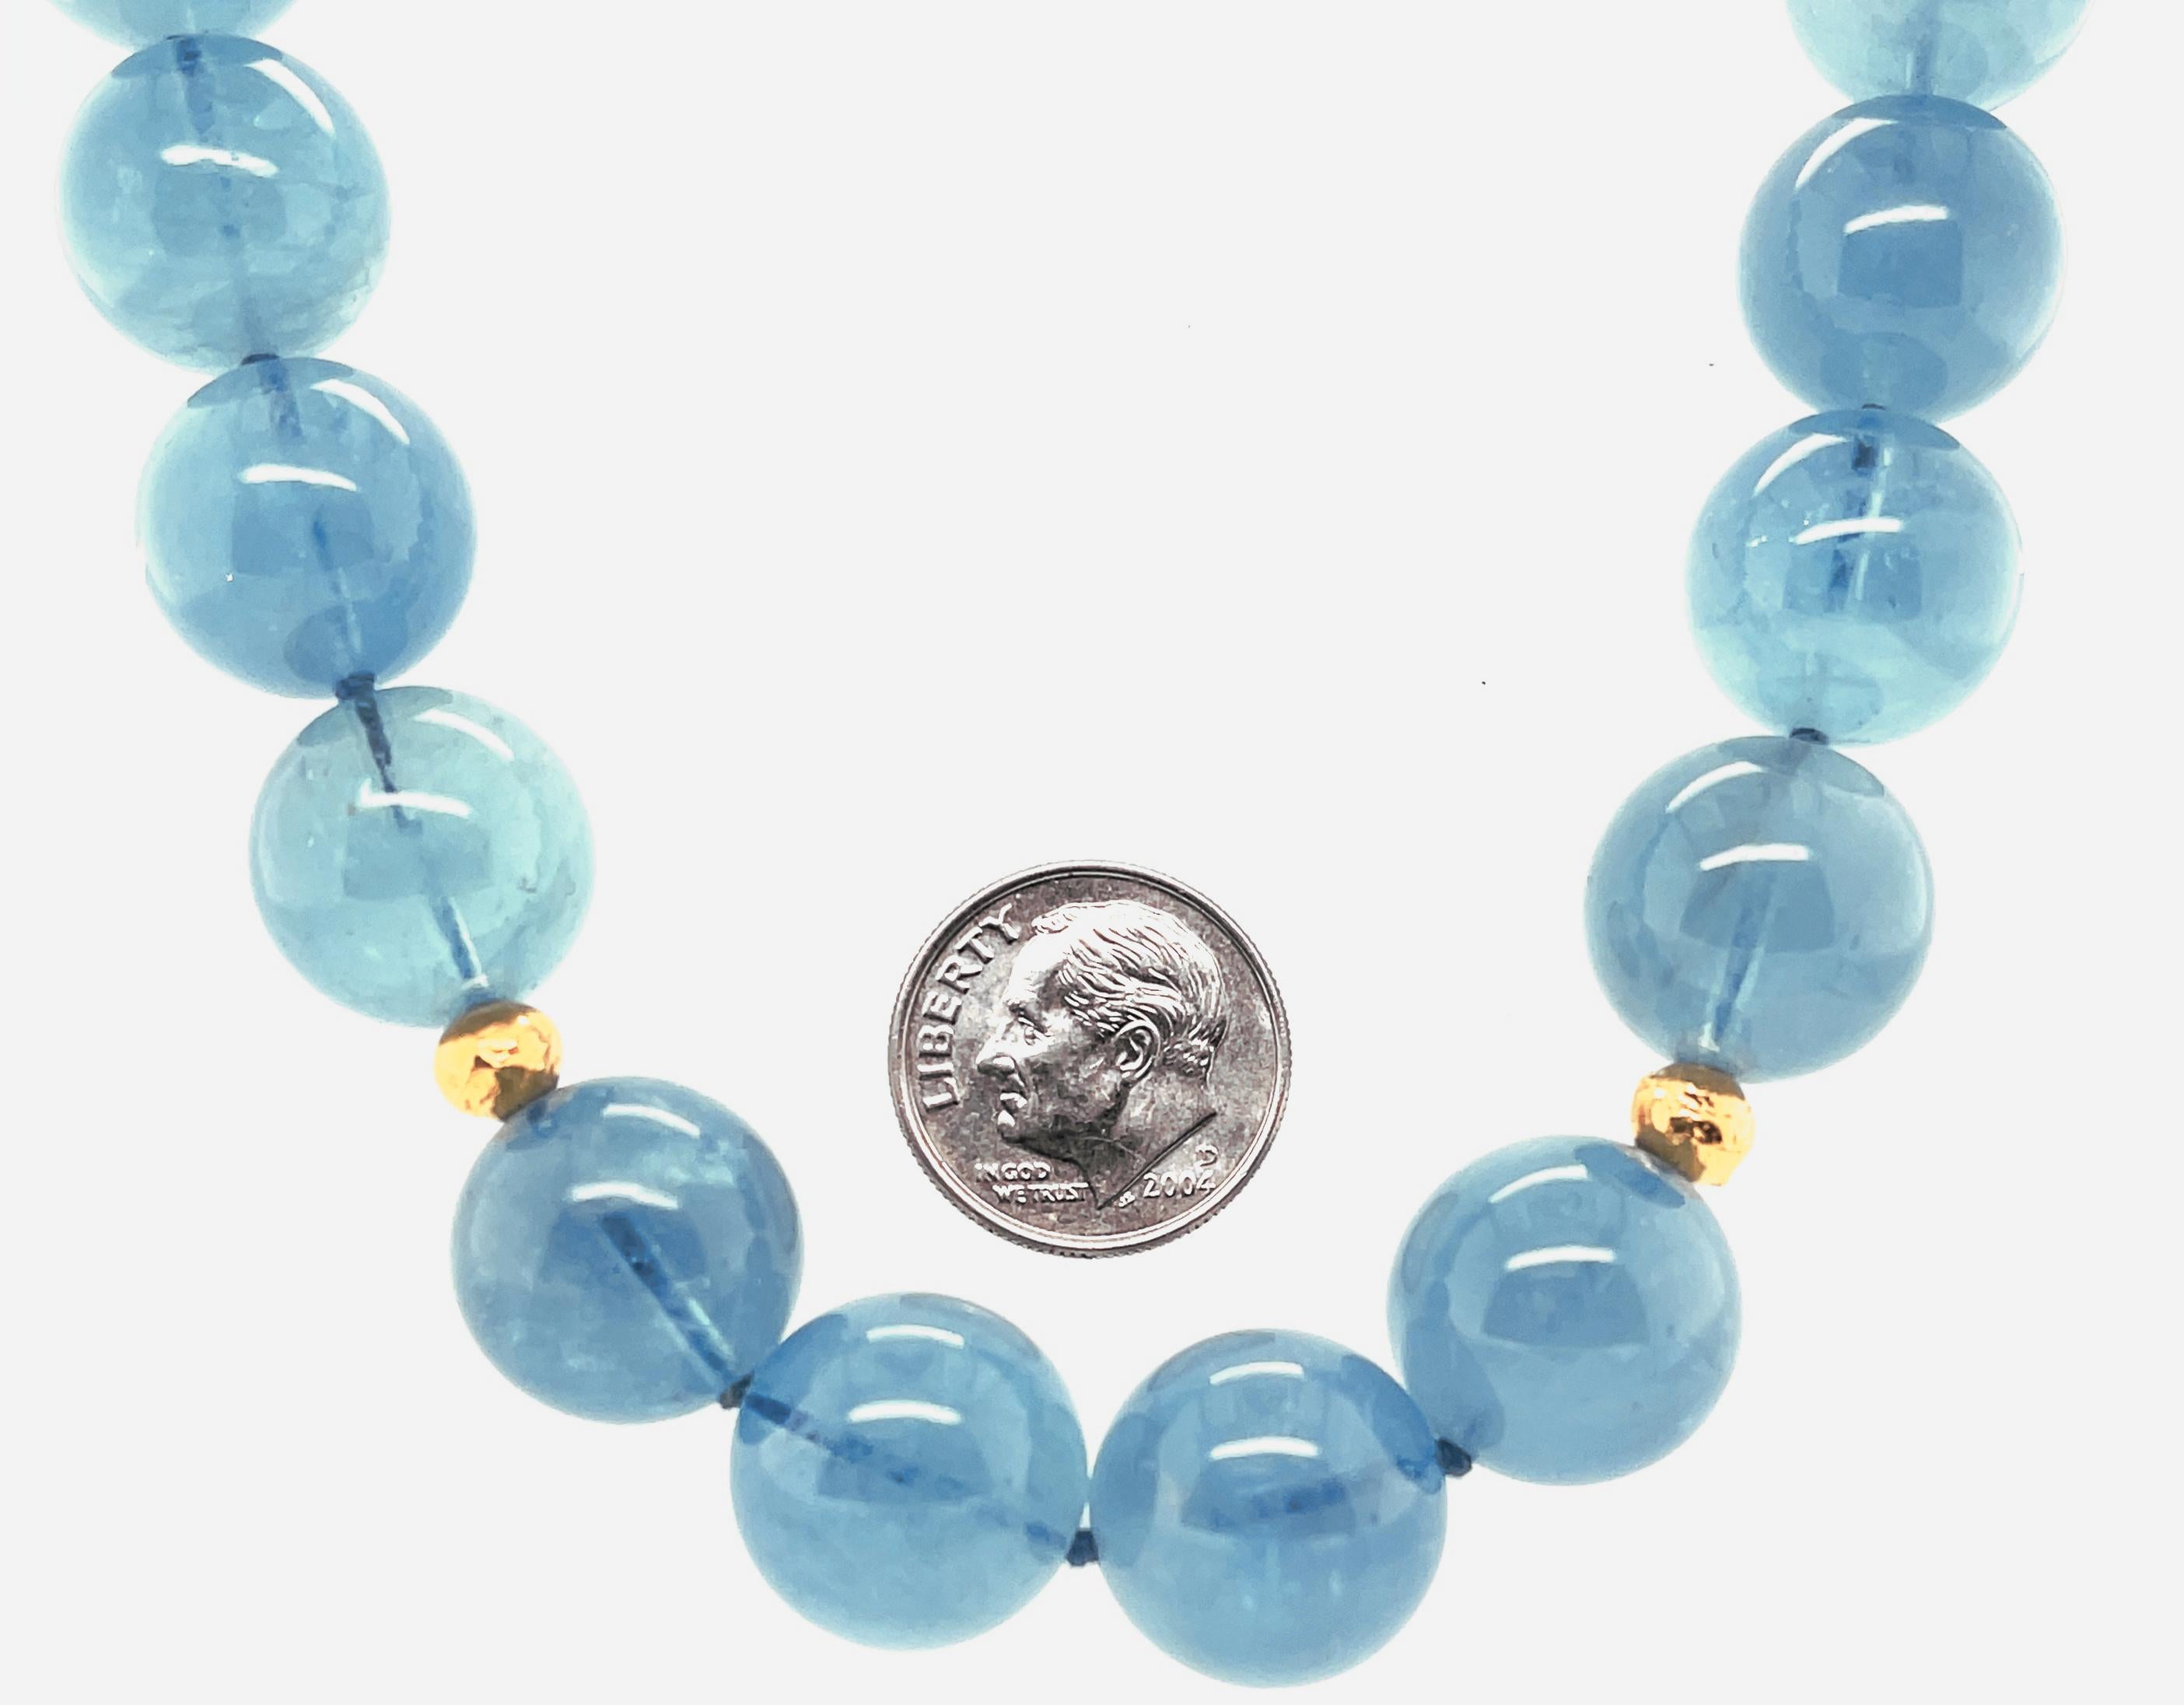 14 to 15mm Round Aquamarine Bead Necklace with Yellow Gold Accents, 18.5 Inches For Sale 1